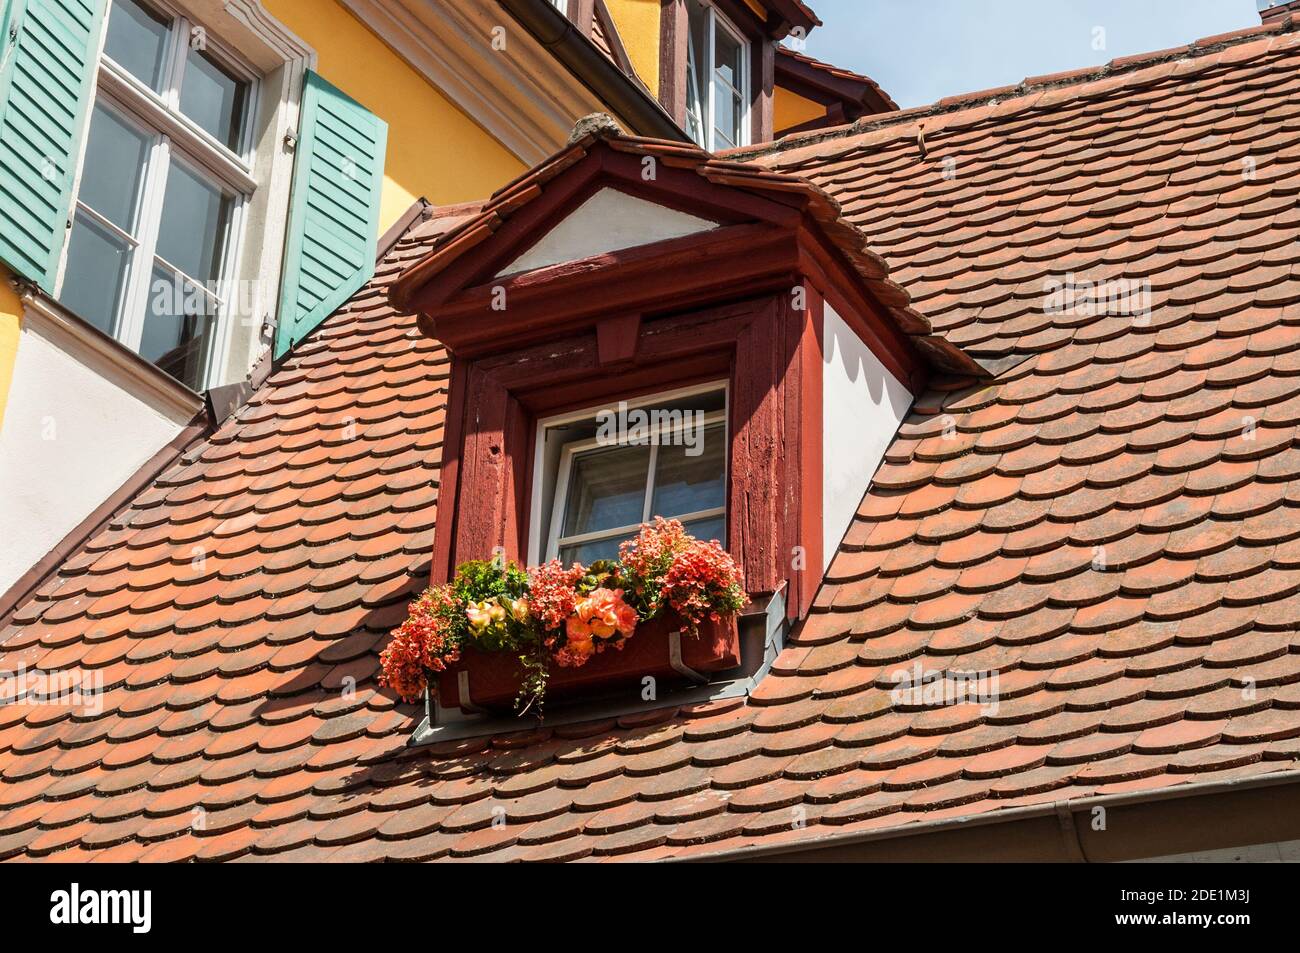 Bamberg, Germany - May 22, 2016: Flowers on mansard roof on traditional half timbered houses in a old town of Bamberg in Germany. Stock Photo